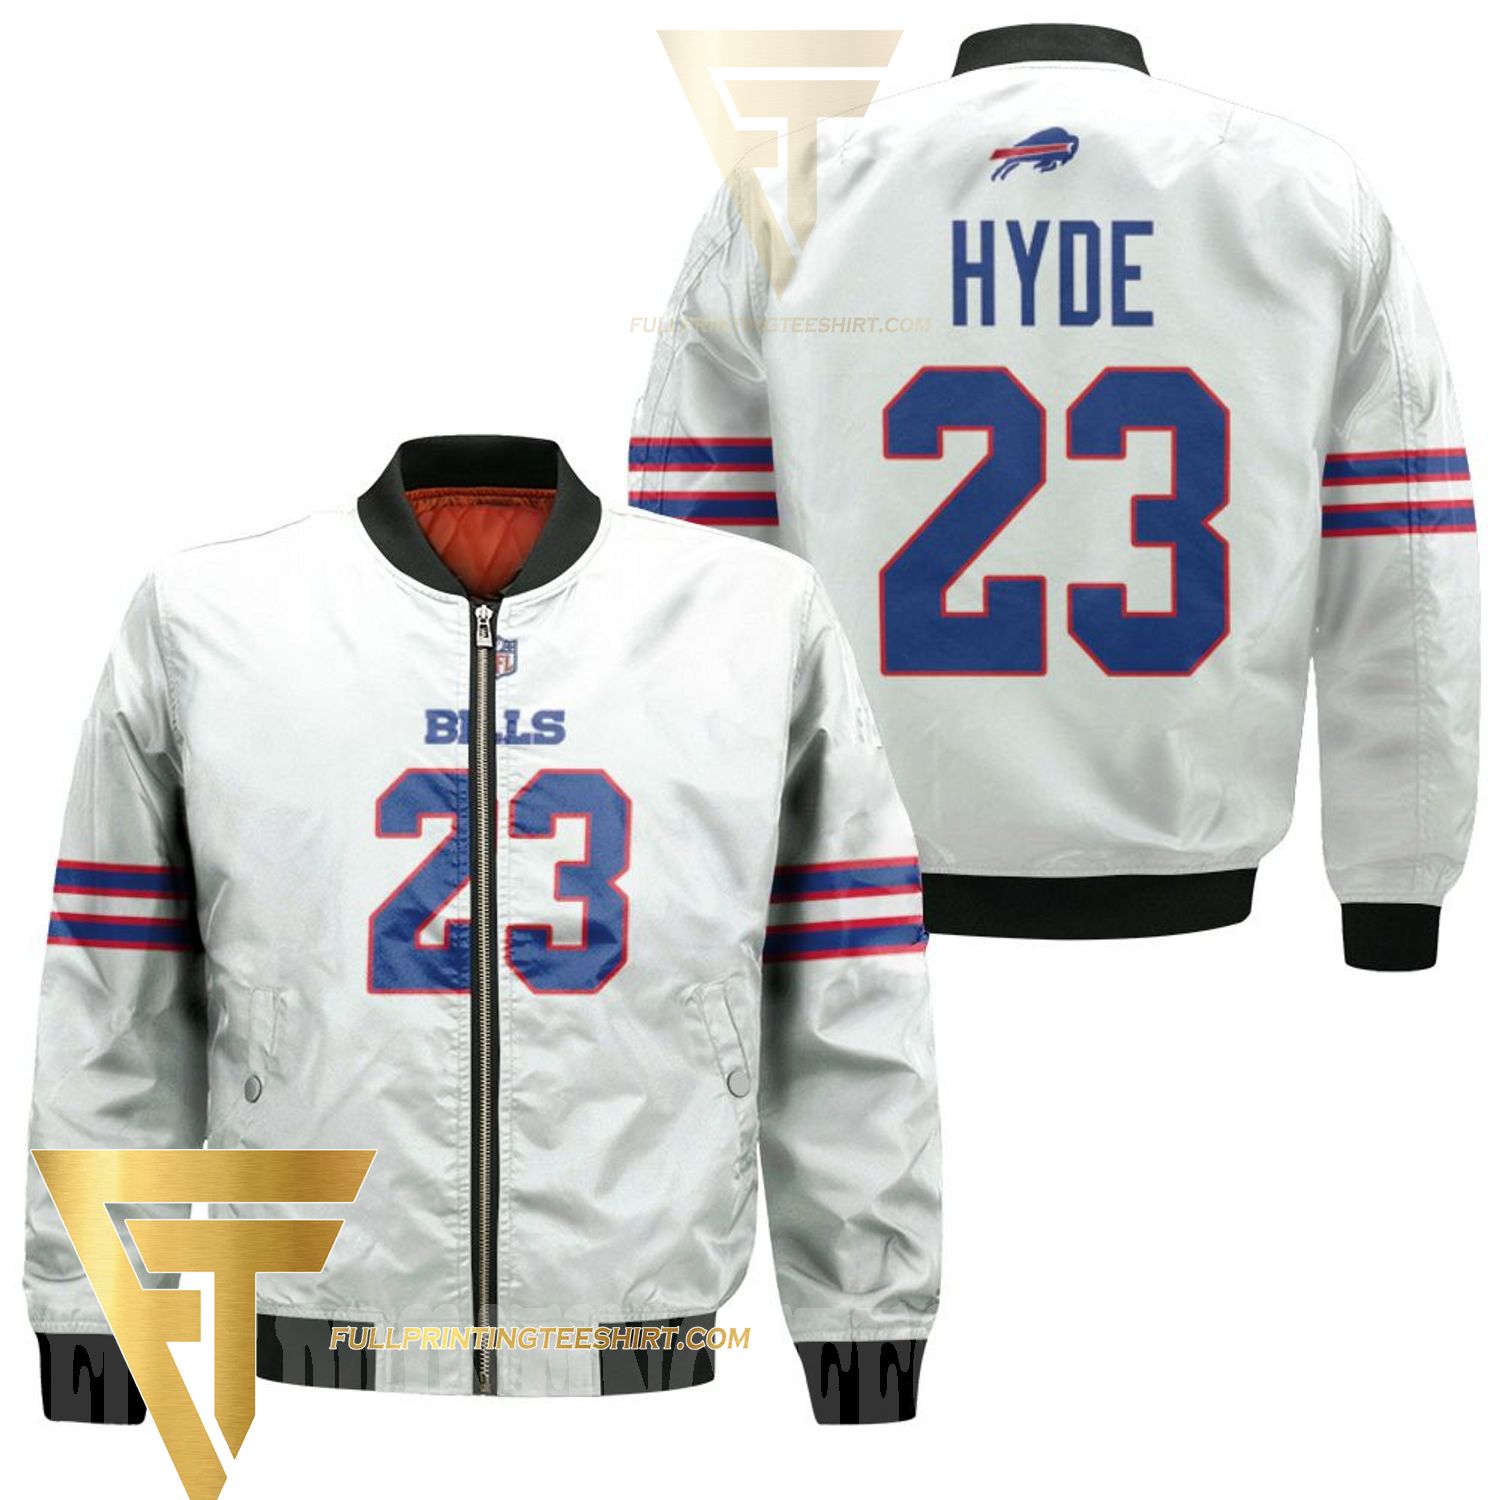 Top-selling item] Buffalo Bills Micah Hyde 23 NFL Great Player American  Football Team Game White Designed Allover Gift For Bills Fans Bomber Jacket